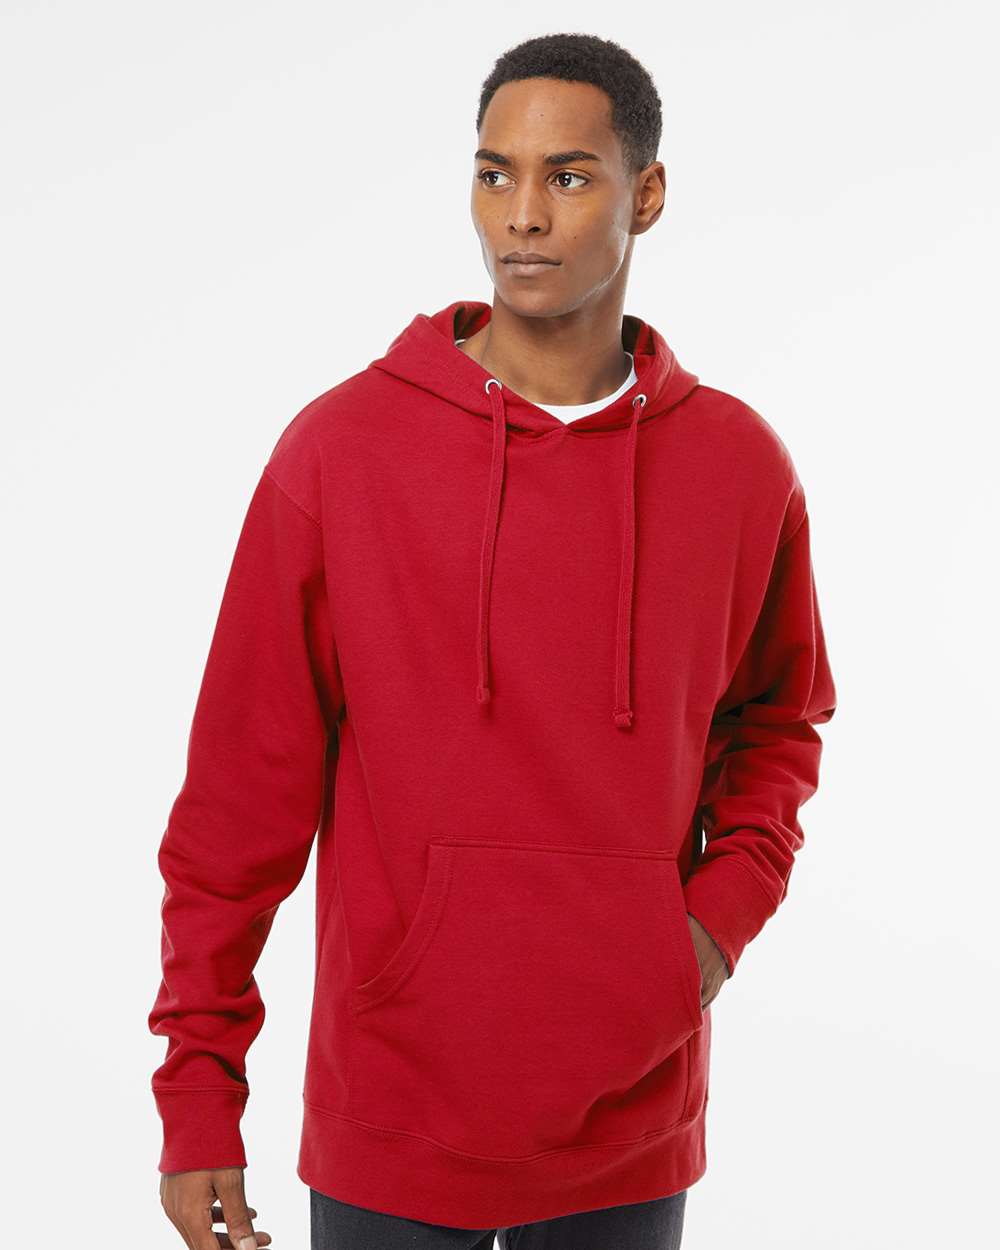 Independent 8.5oz Midweight Hoodie